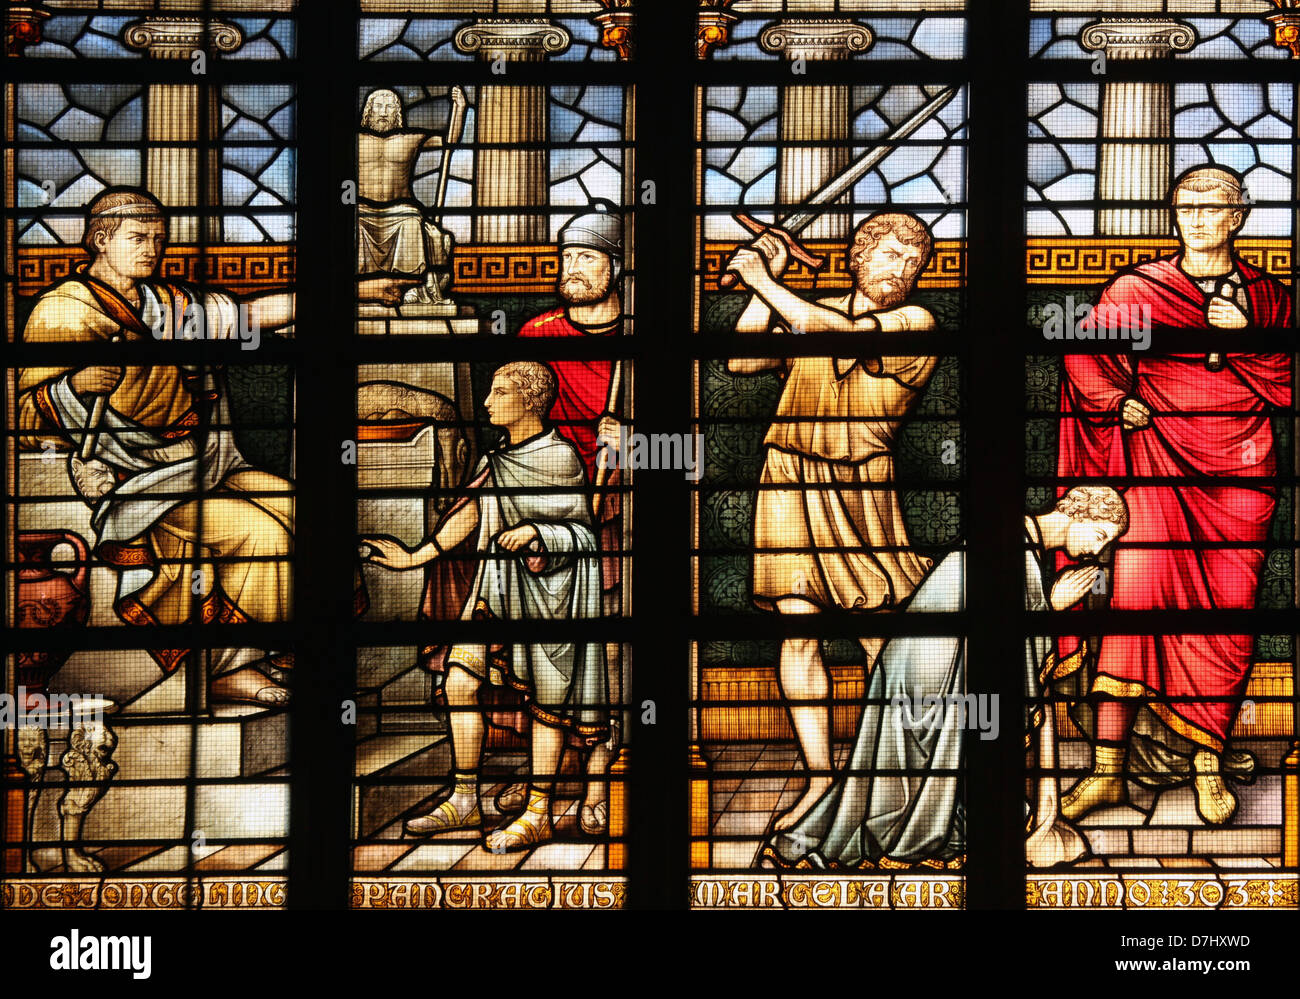 stained glass windows in the 'big church' in dordrecht Stock Photo